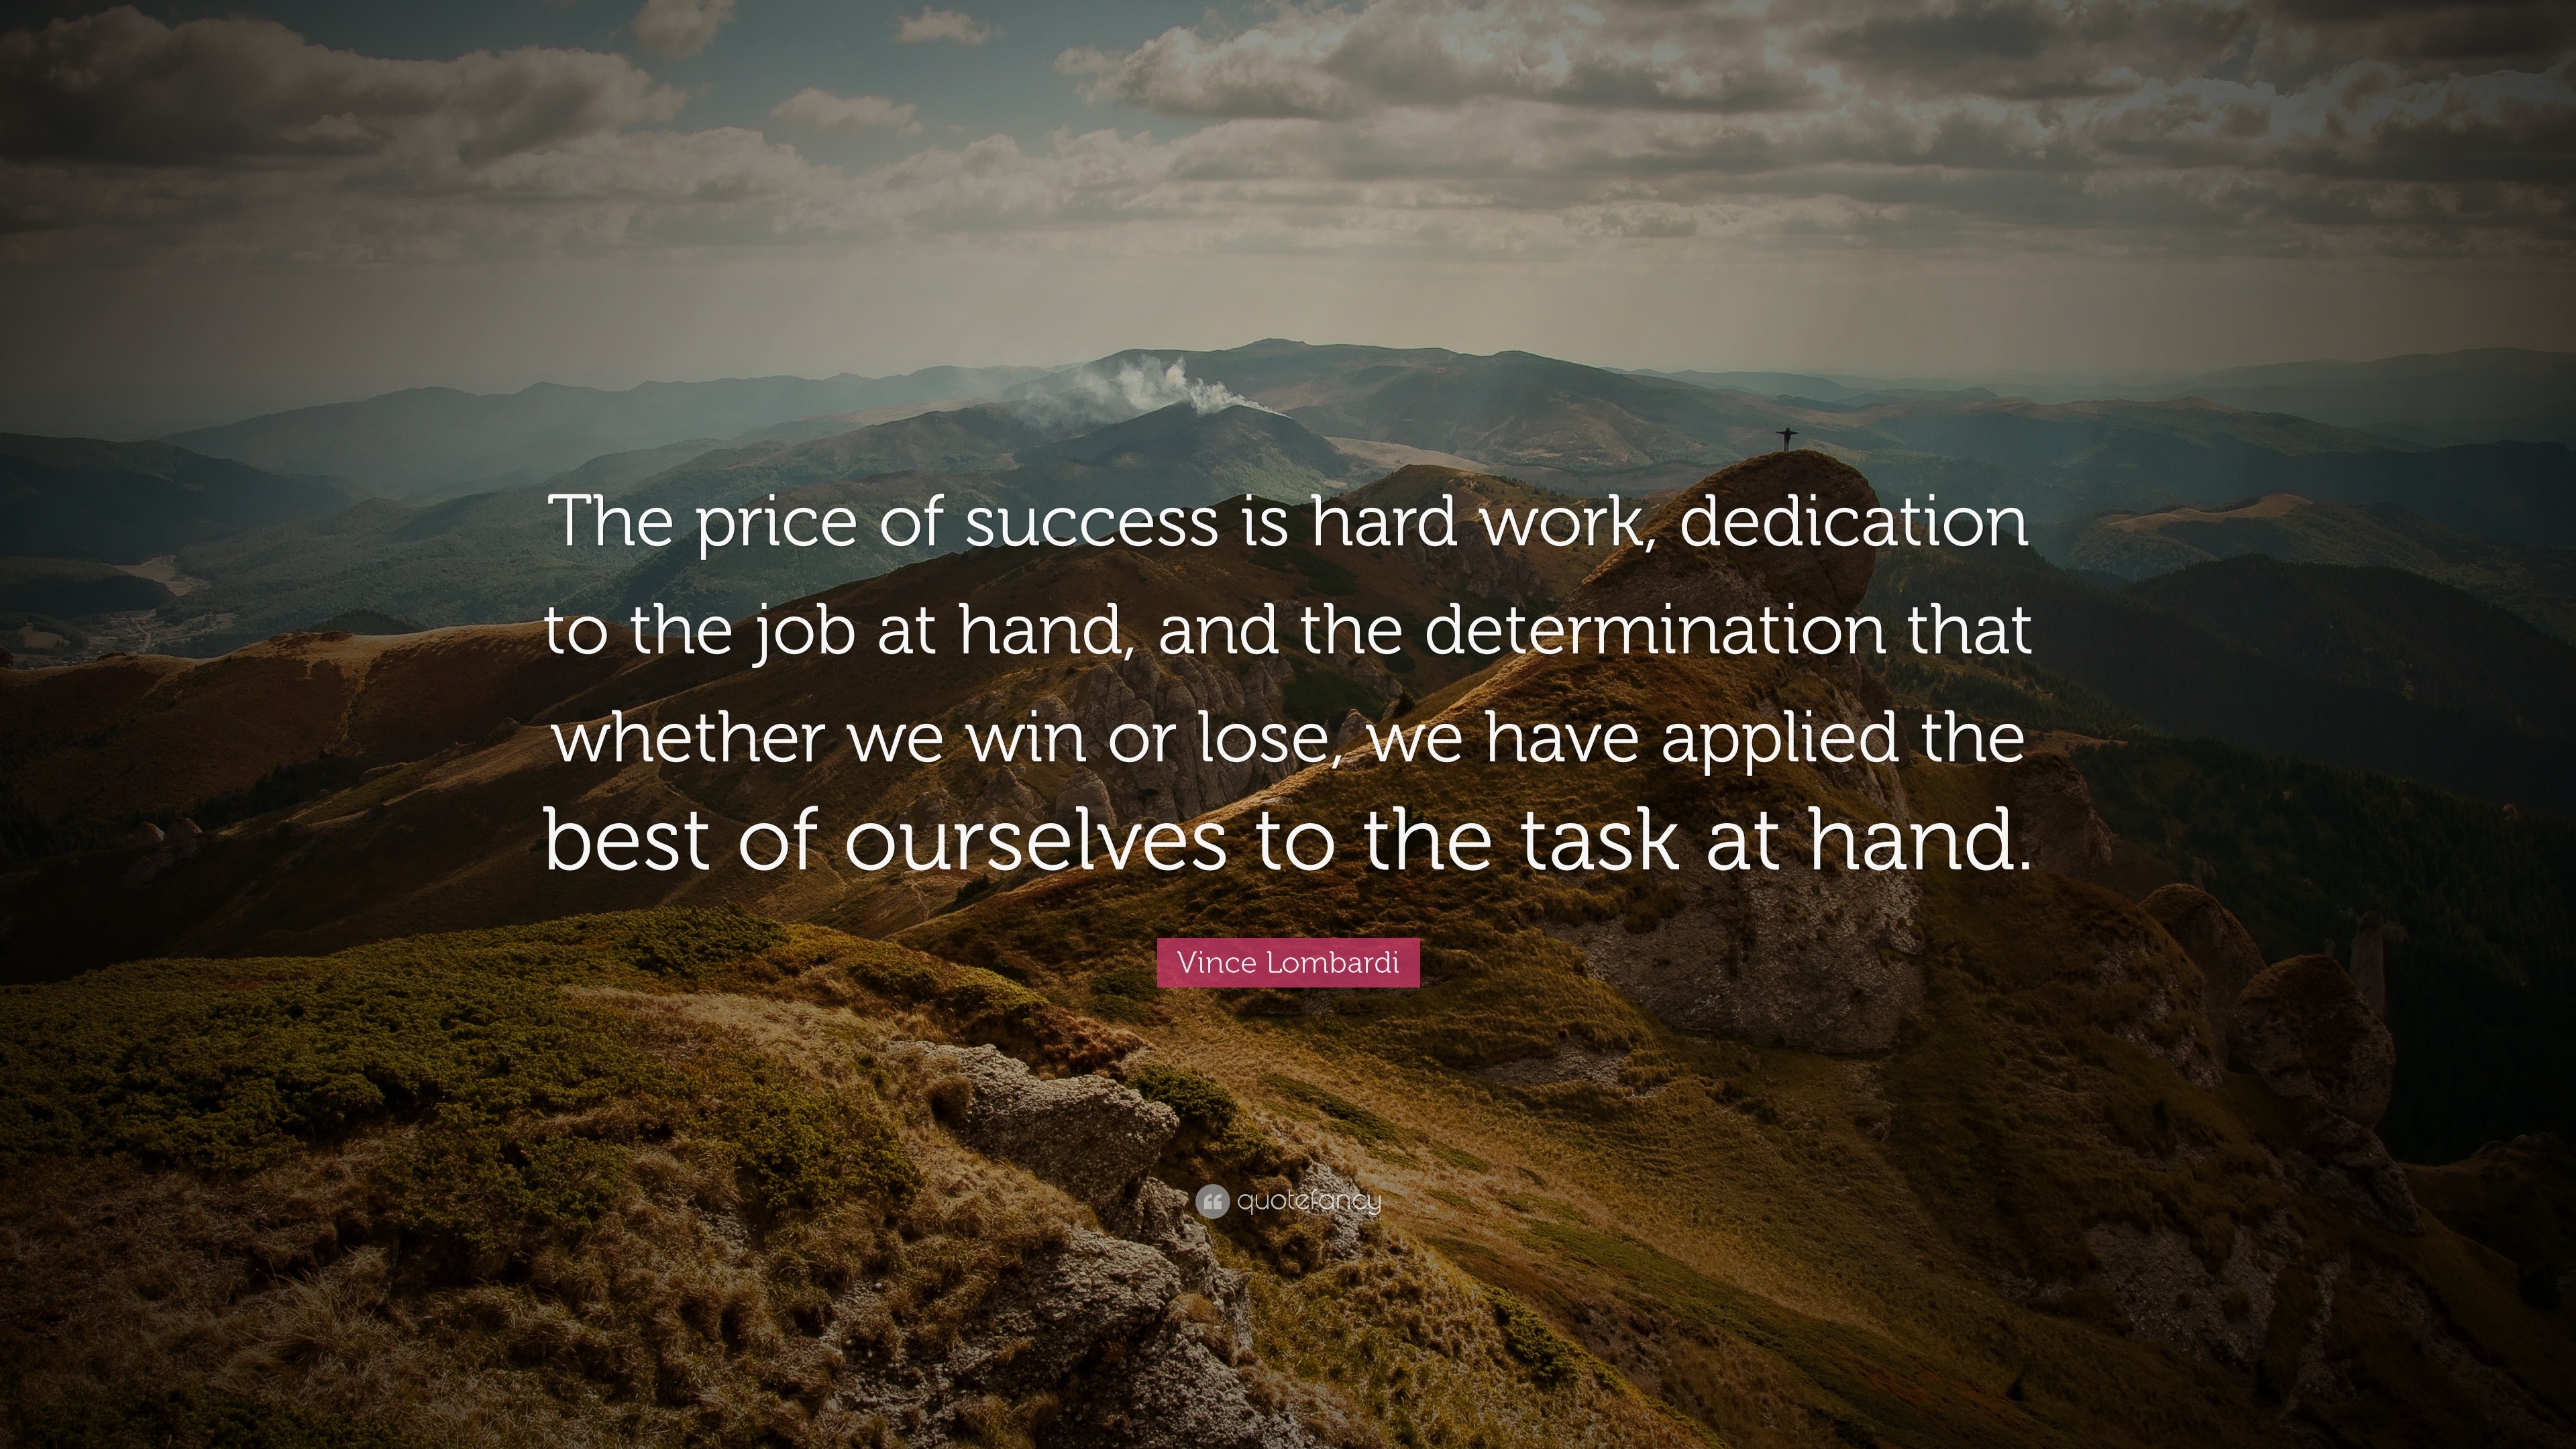 Quotes On Dedication And Determination - Cocharity